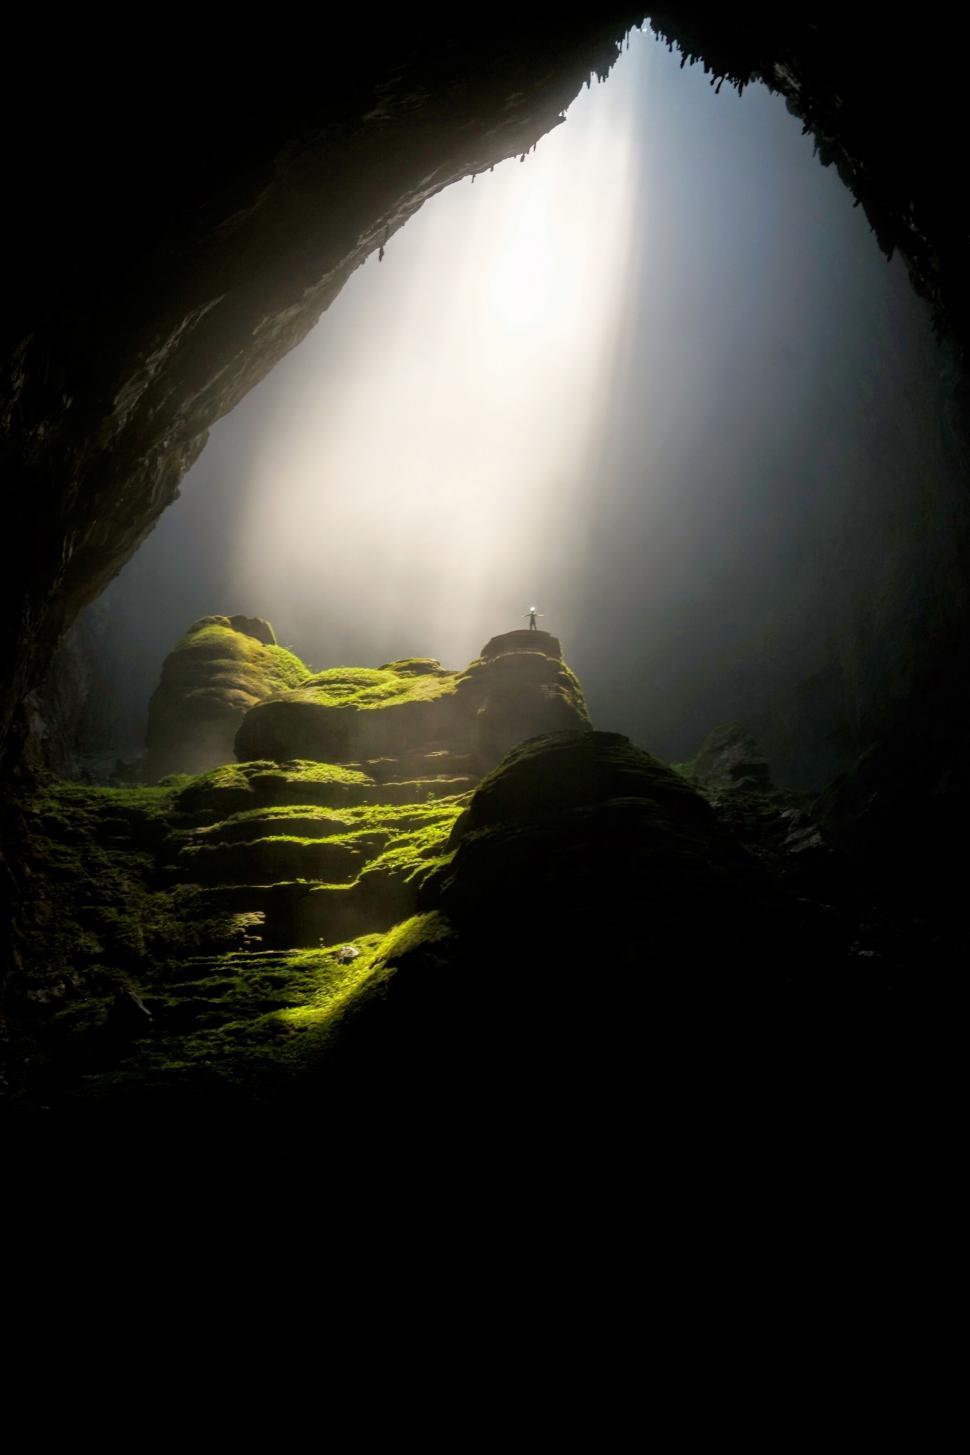 Free Image of Cave entrance with light and lone figure 